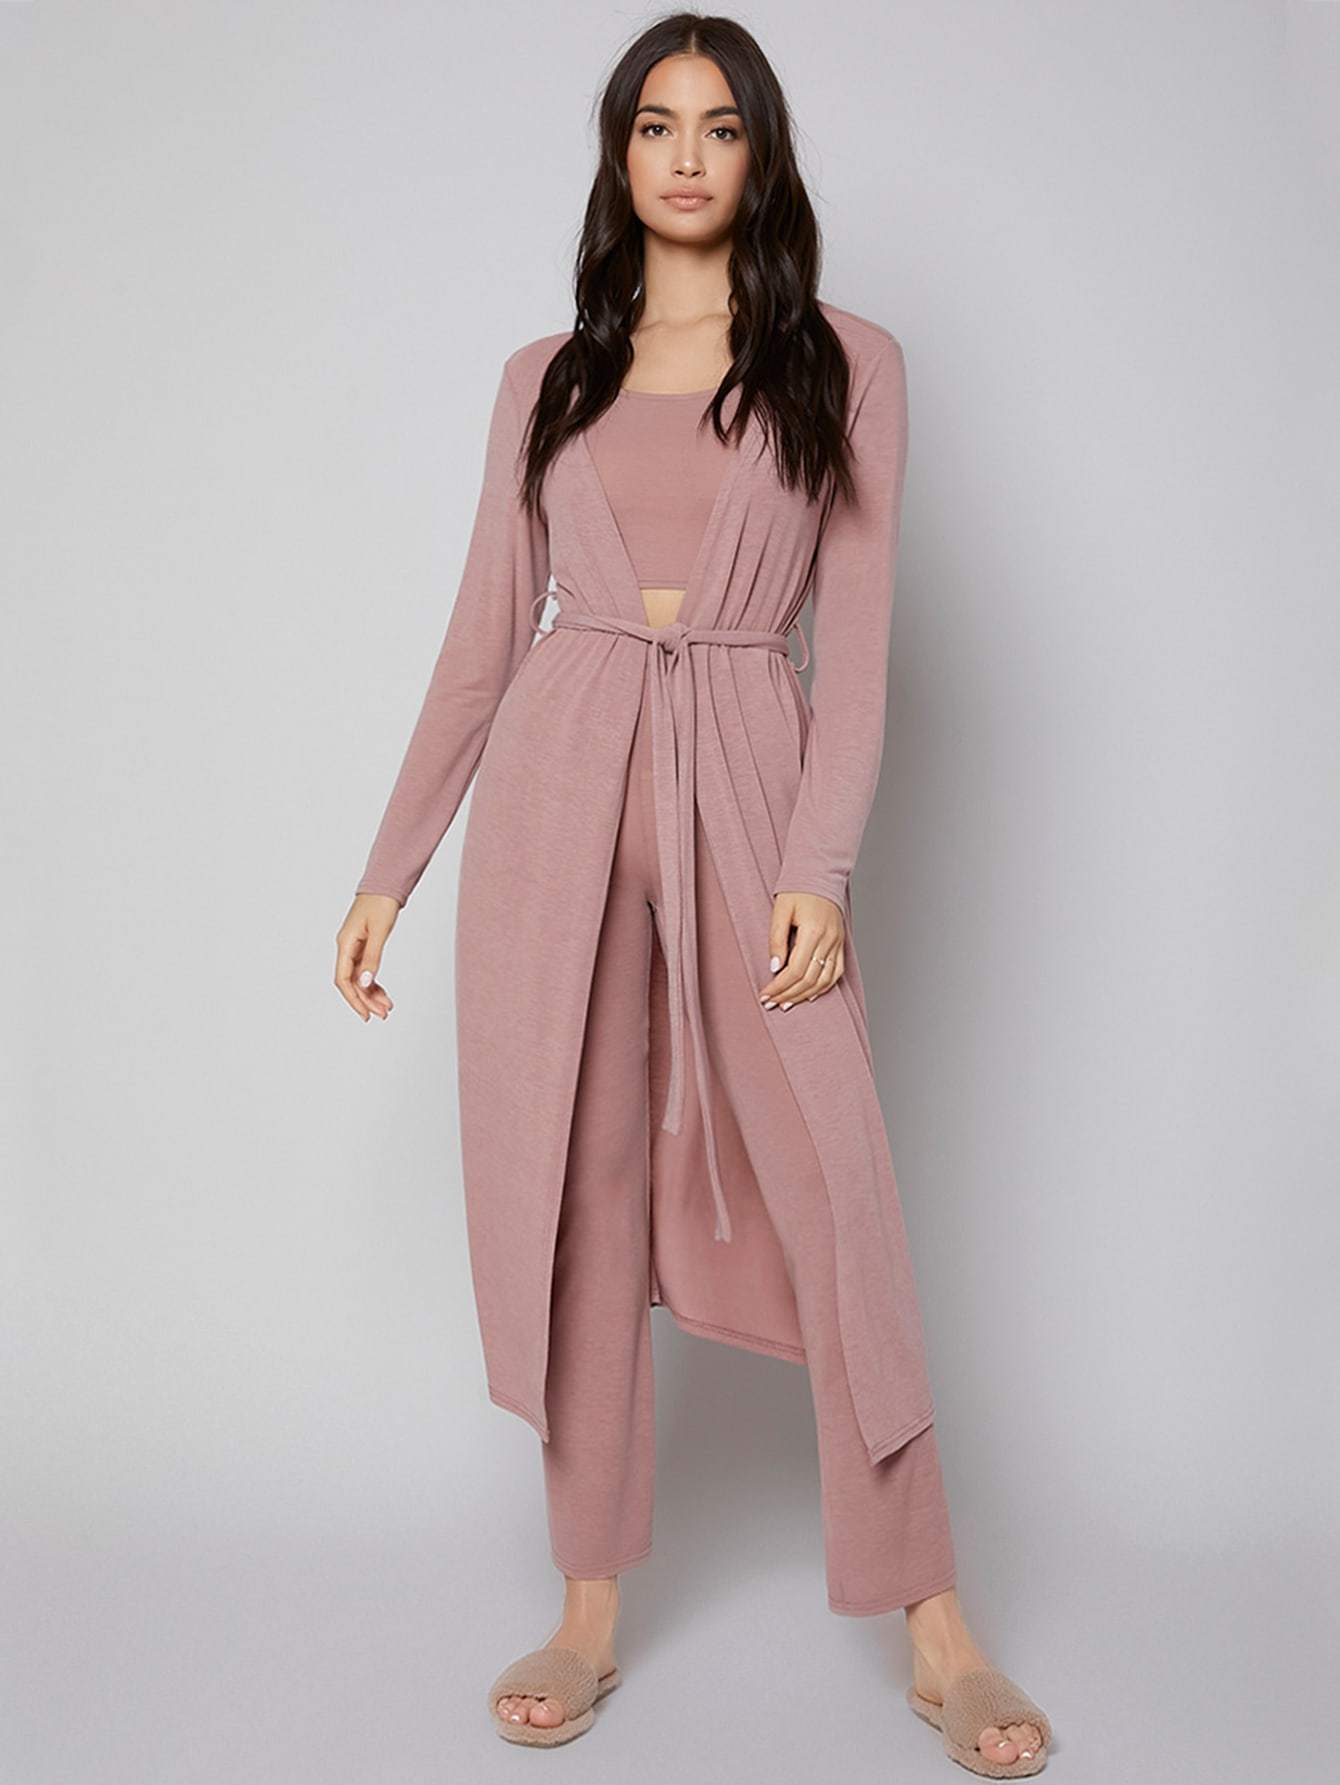 Dusty Pink Spaghetti Strap Solid Cami Lounge Set With Belted Robe